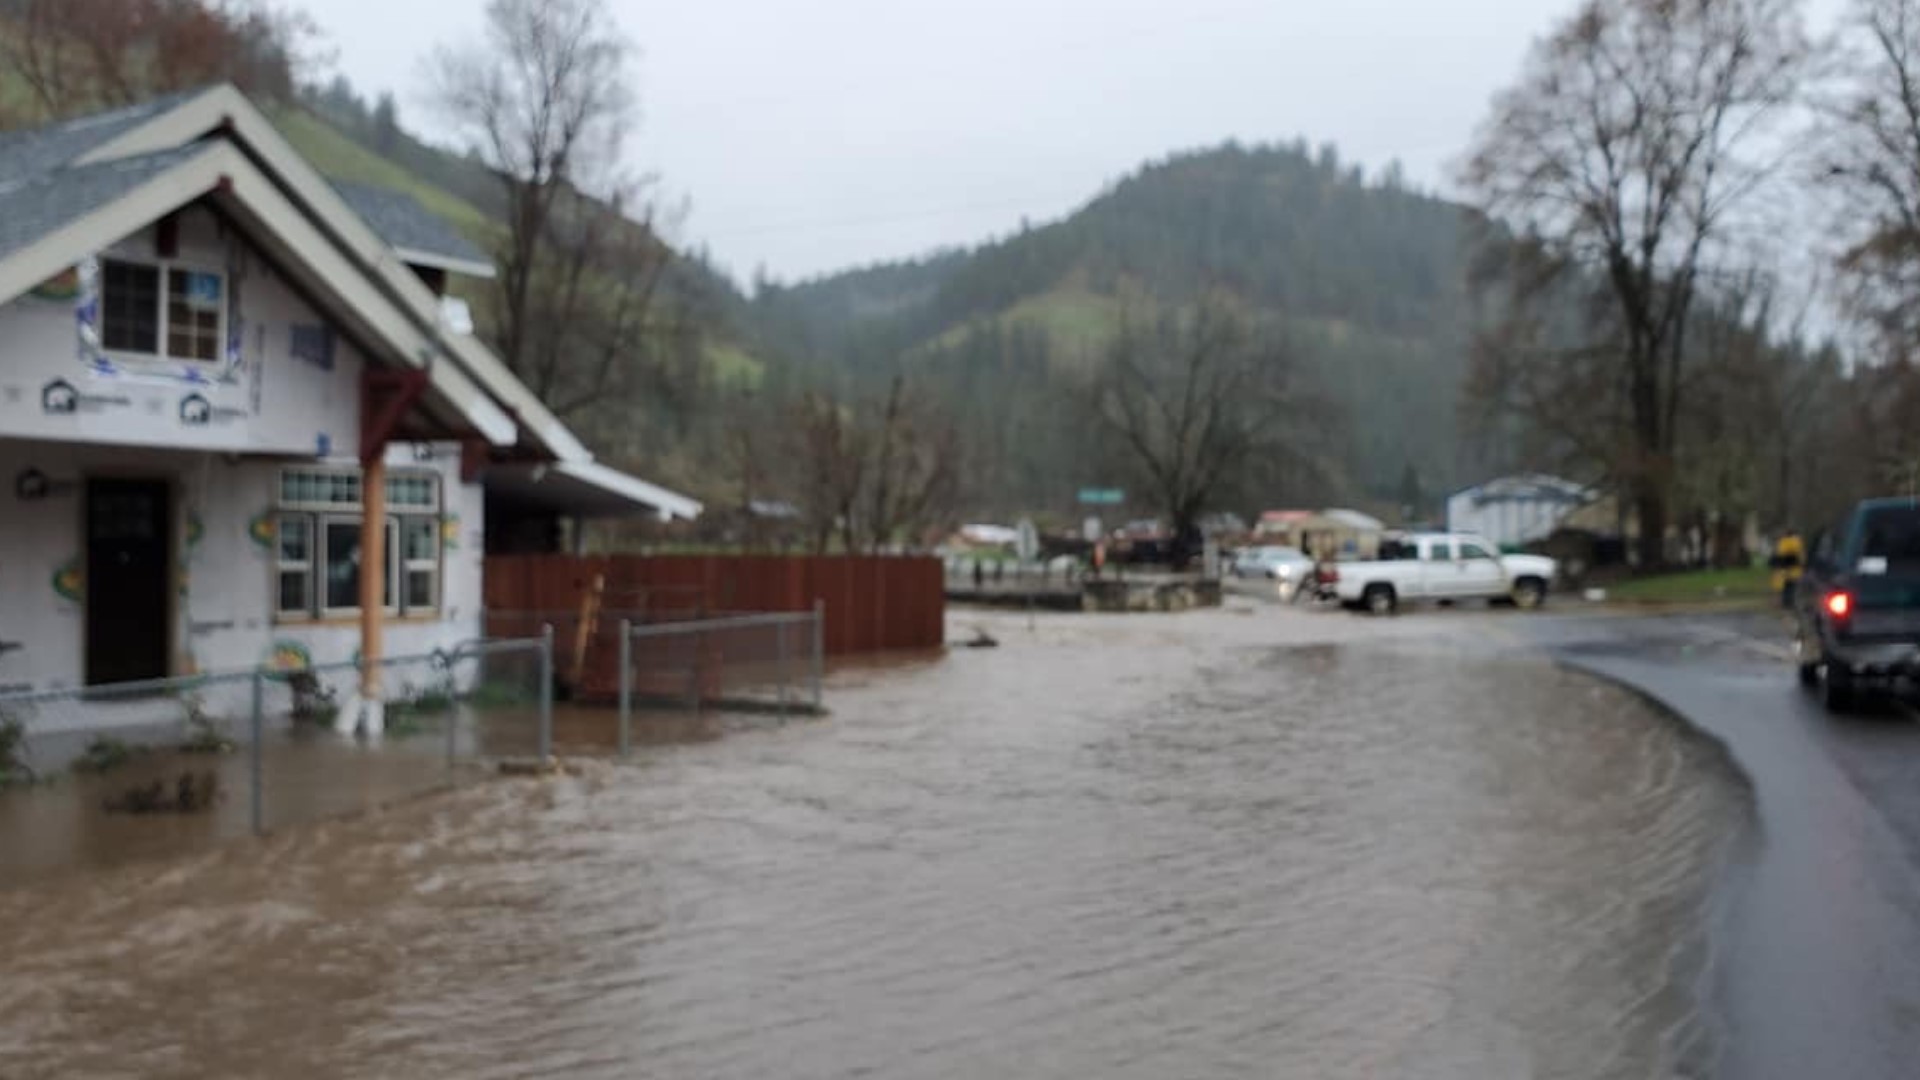 Flooding closes roads in Idaho cities near Clearwater River